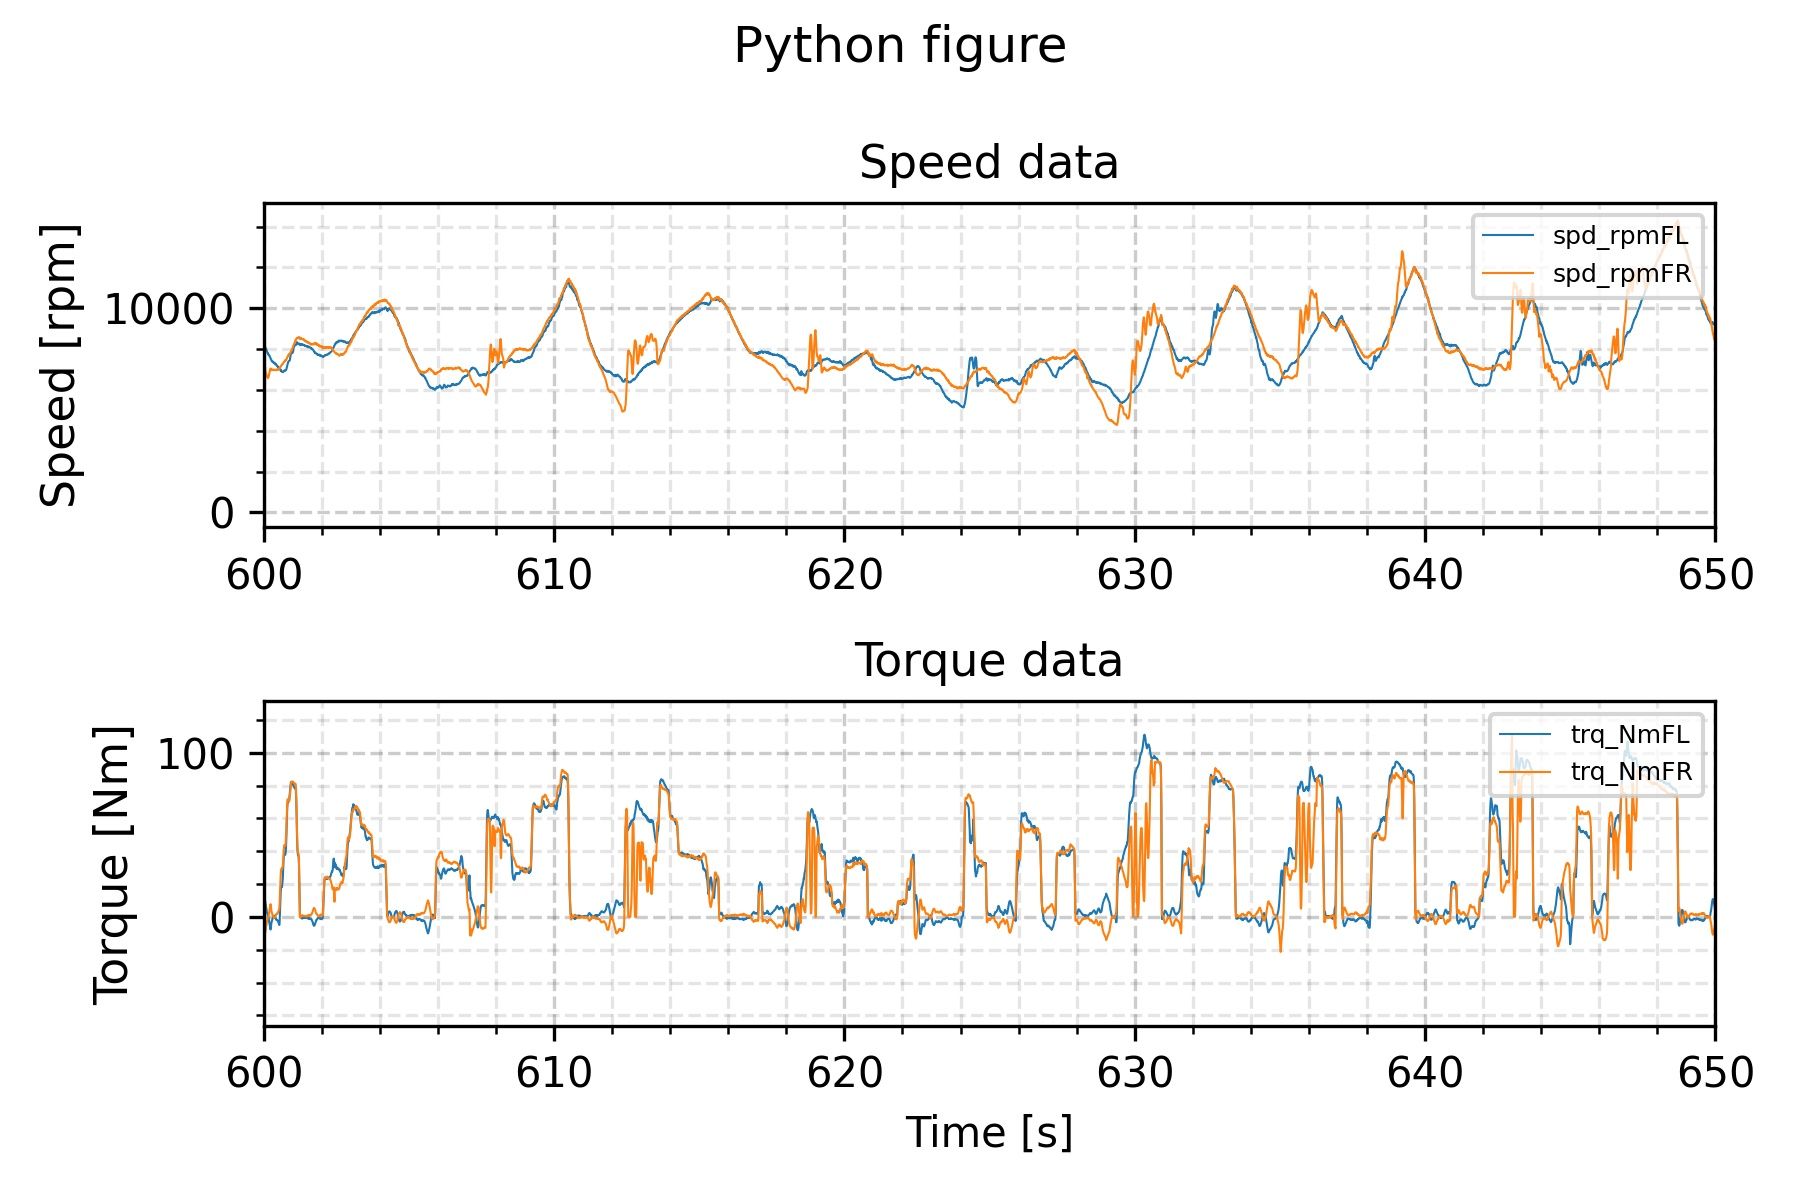 Timeseries plot of the speed (top) and torque (bottom) data of a race car created using Python